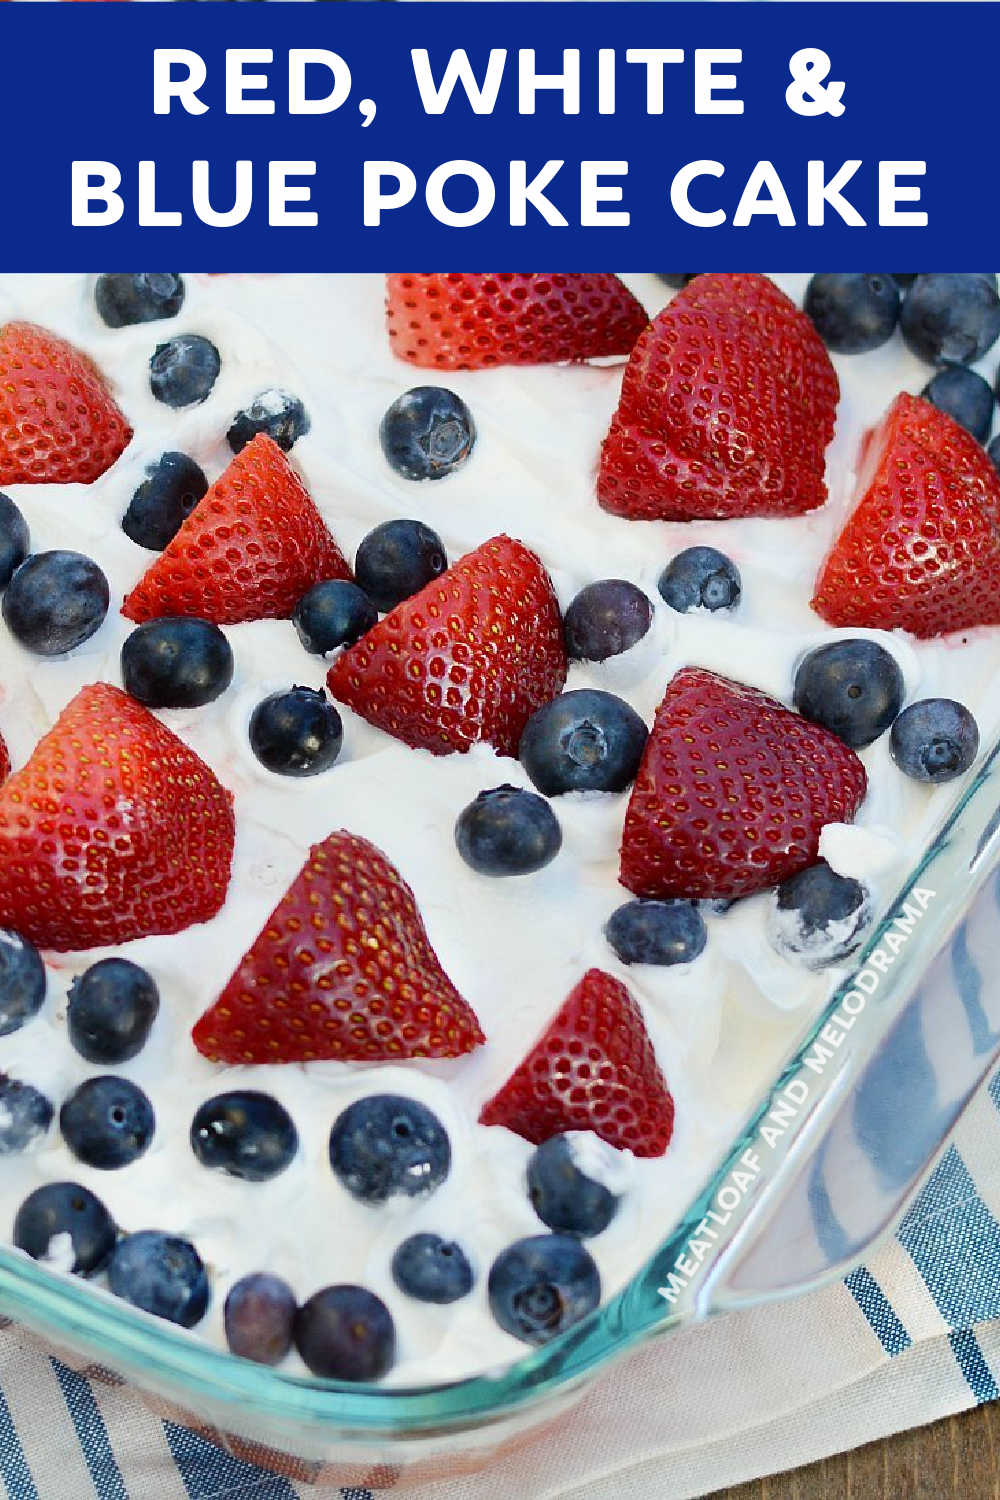 This Red White and Blue Poke Cake is filled with strawberry Jello and topped with Cool Whip, fresh strawberries and blueberries. It's an easy dessert  recipe for summer that's perfect for the Fourth of July, Memorial Day or any patriotic holiday! via @meamel